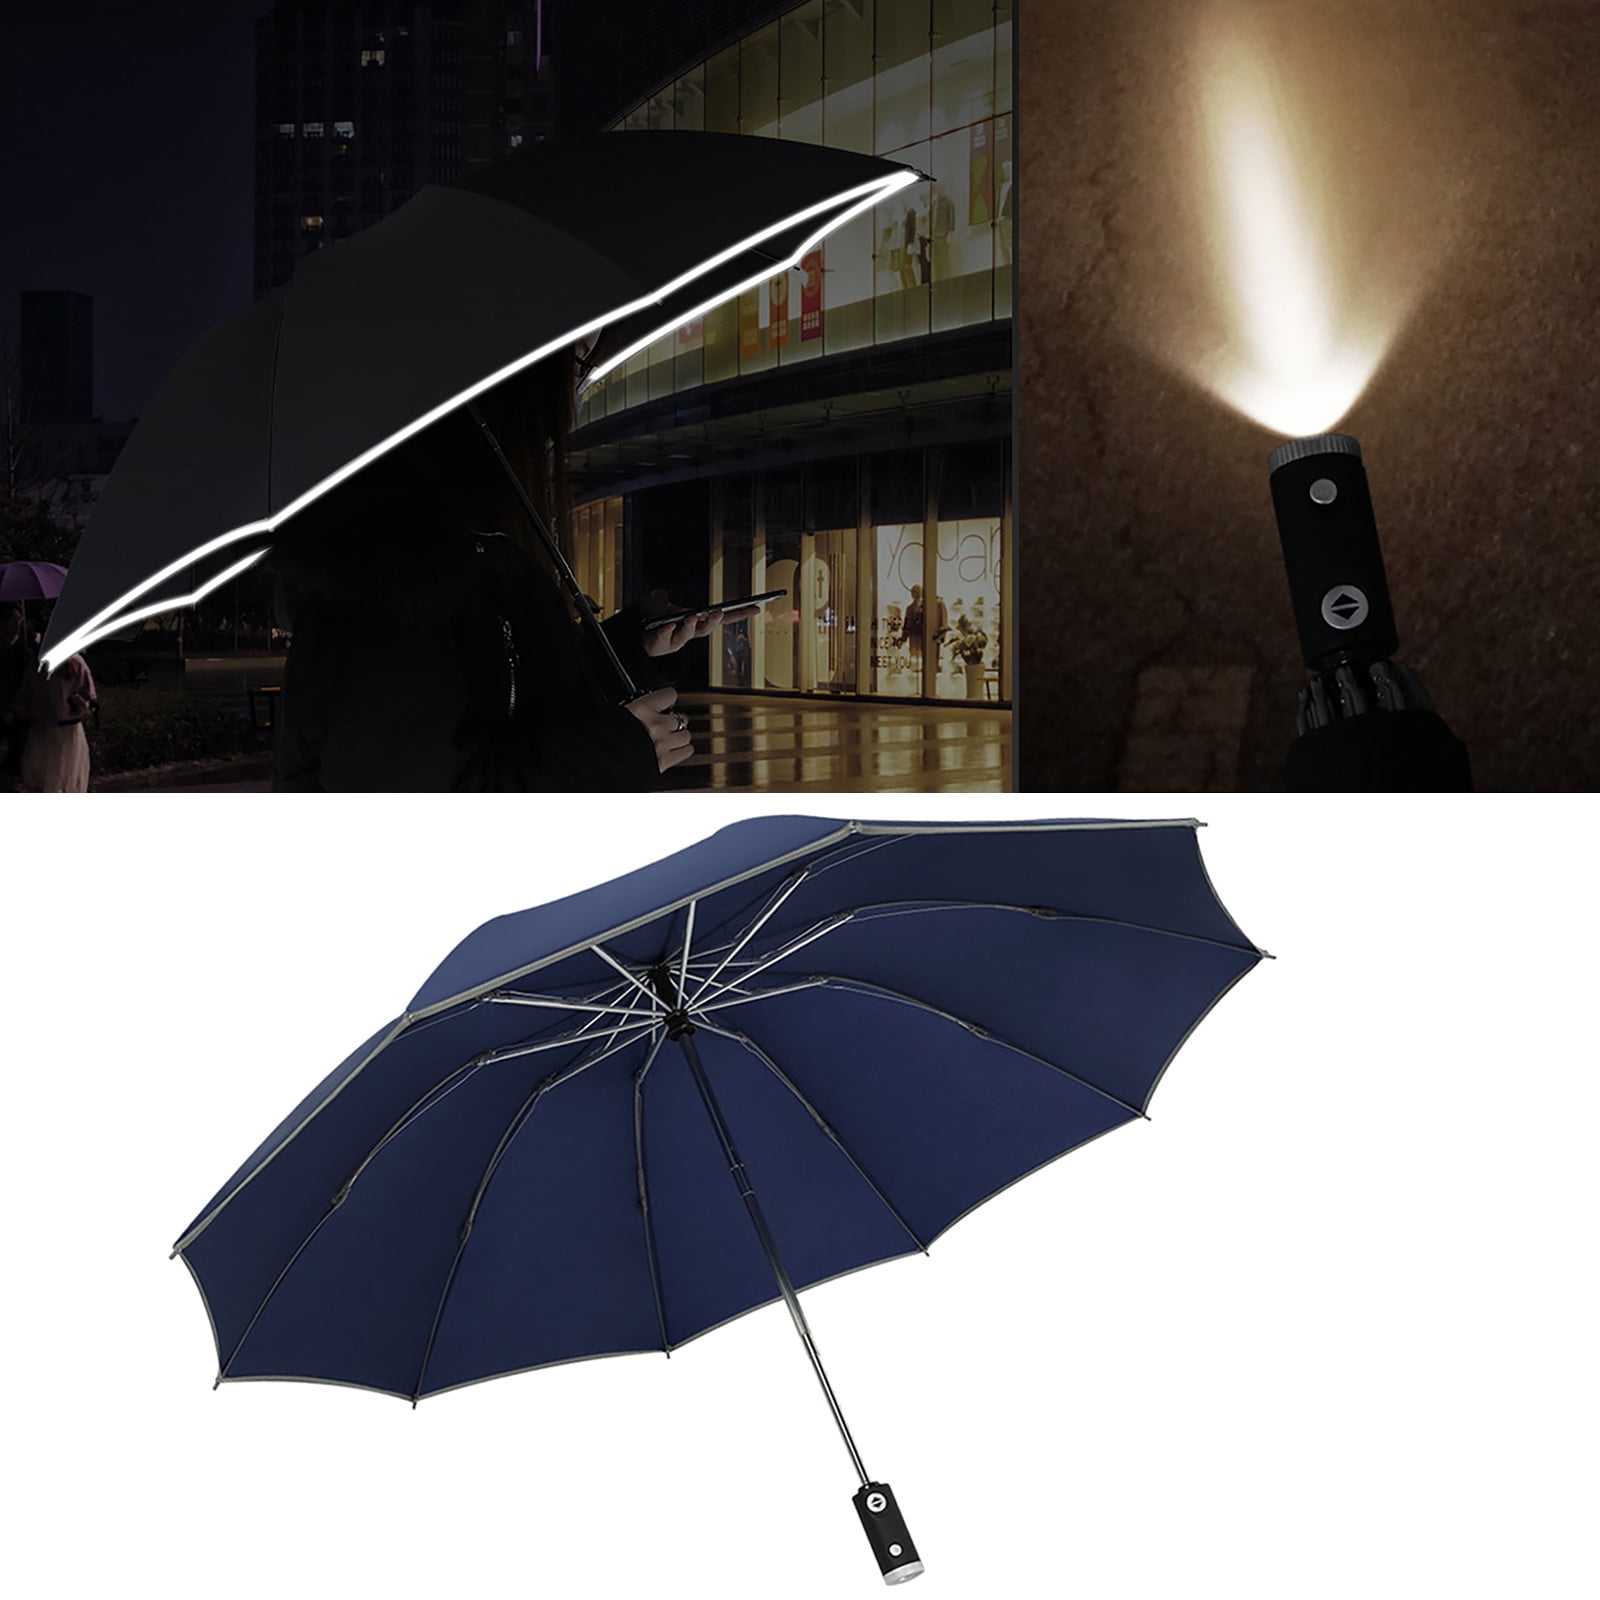 Details about   Automatic Umbrella Reverse Folding Business Umbrella With Reflective Strips Umbr 